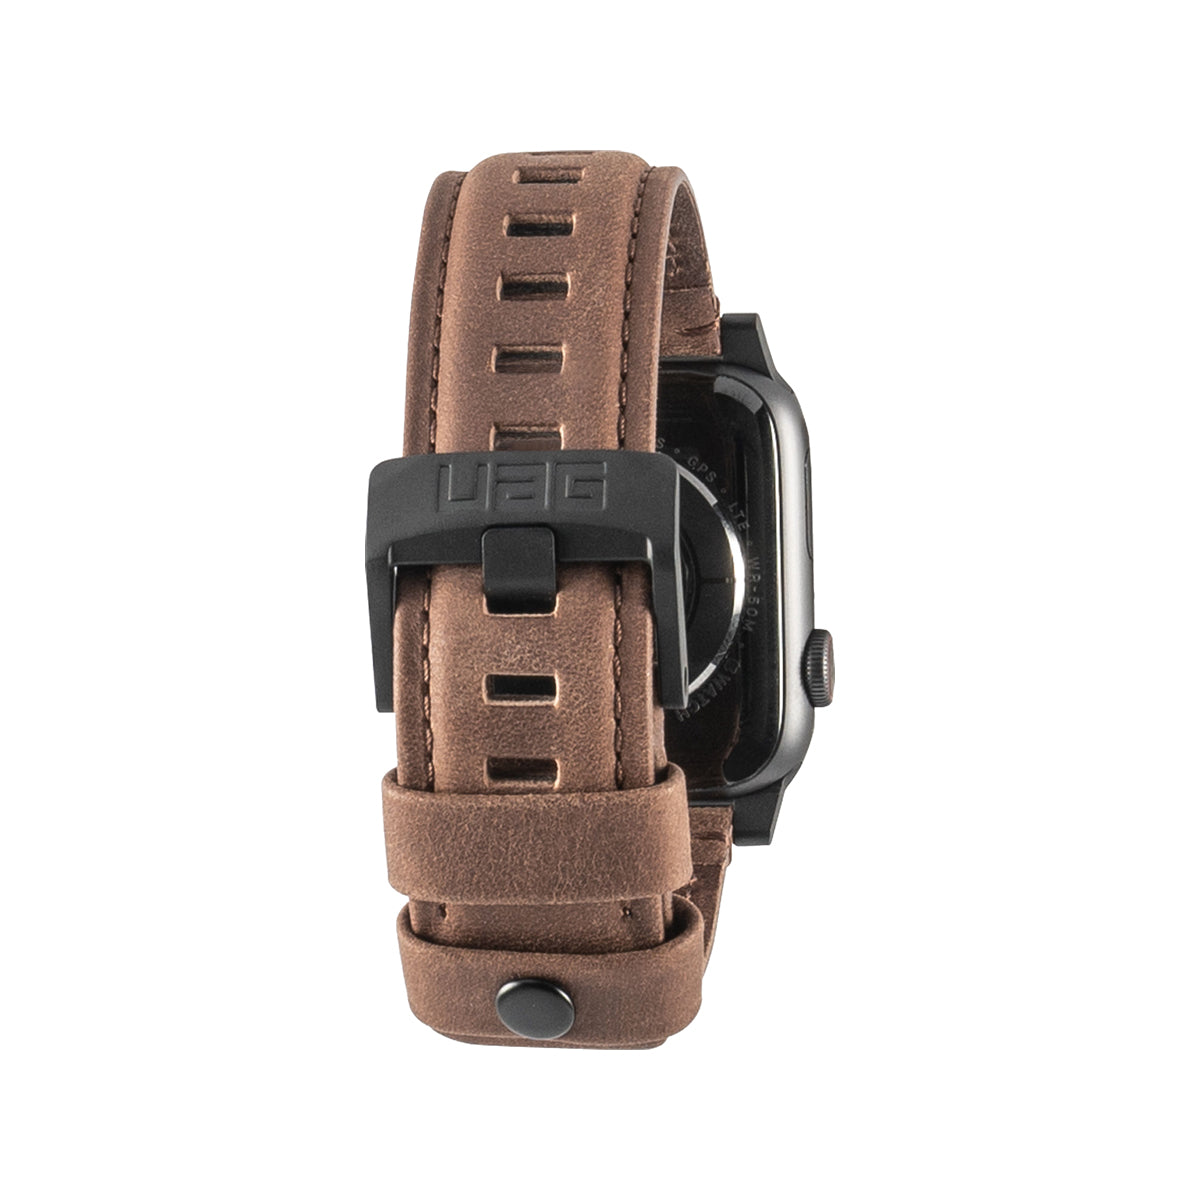 UAG Apple Watch 42mm/44mm Leather Strap - Brown.